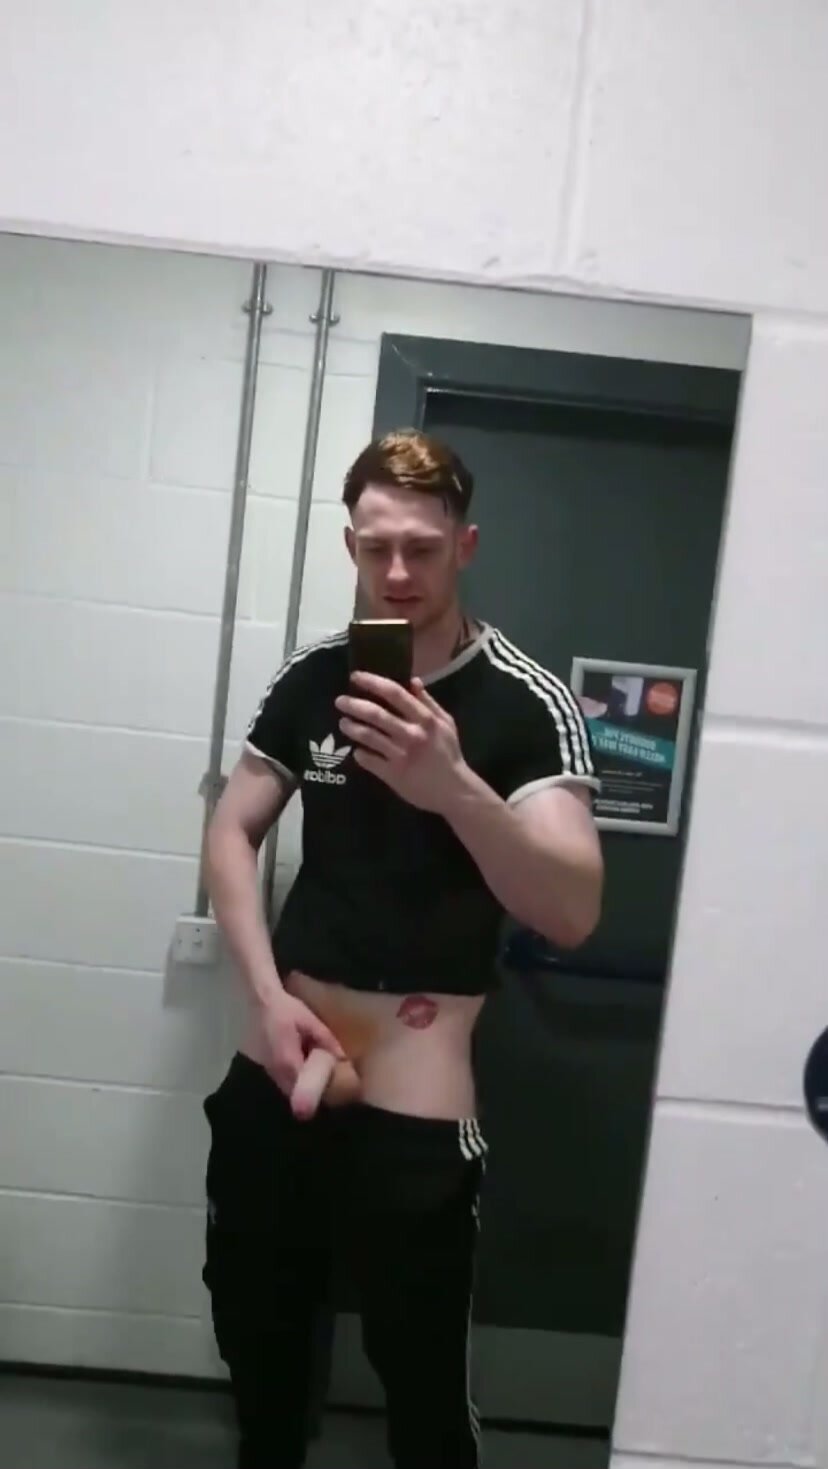 Cocky ginger chav shows off at gym